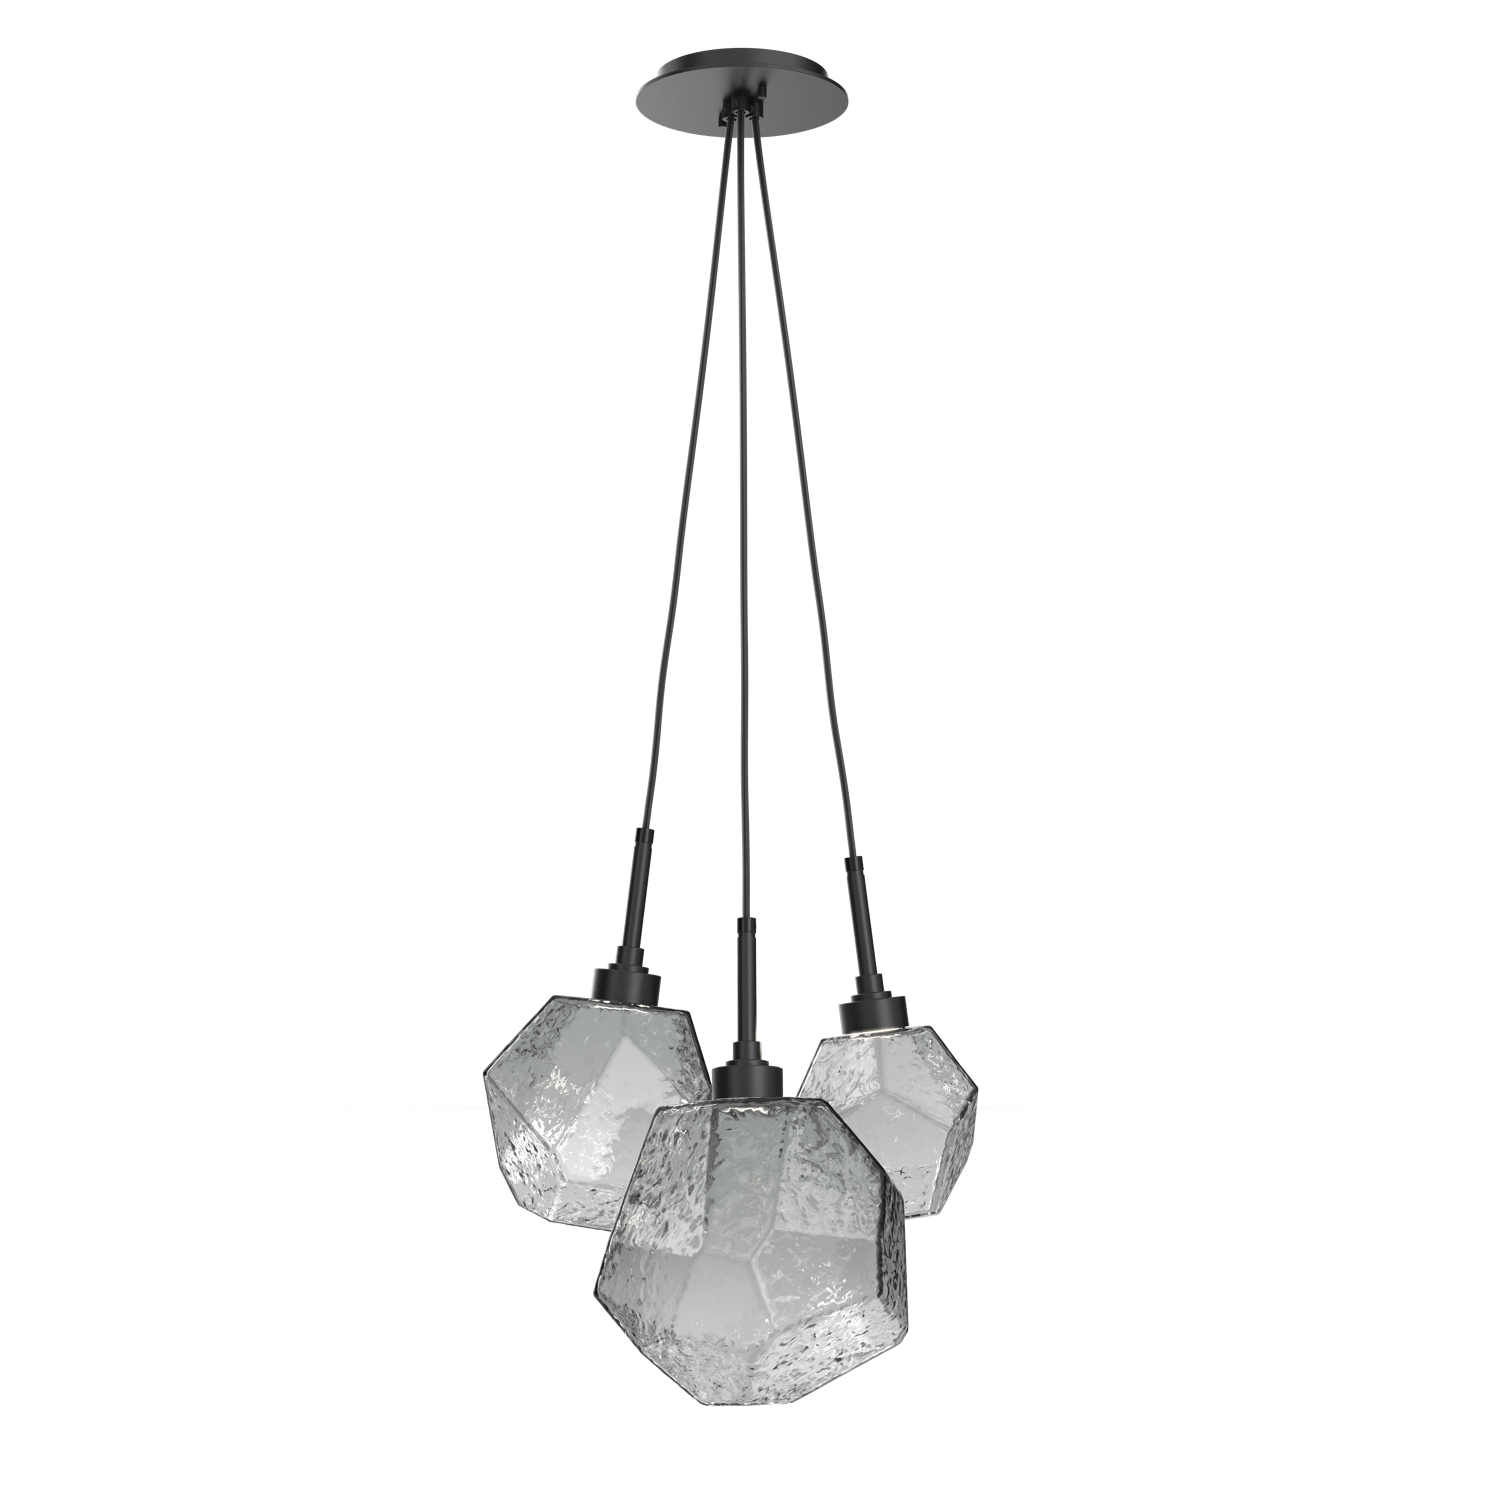 CHB0039-0E-MB-S-Hammerton-Studio-Gem-3-light-cluster-pendant-light-with-matte-black-finish-and-smoke-blown-glass-shades-and-LED-lamping